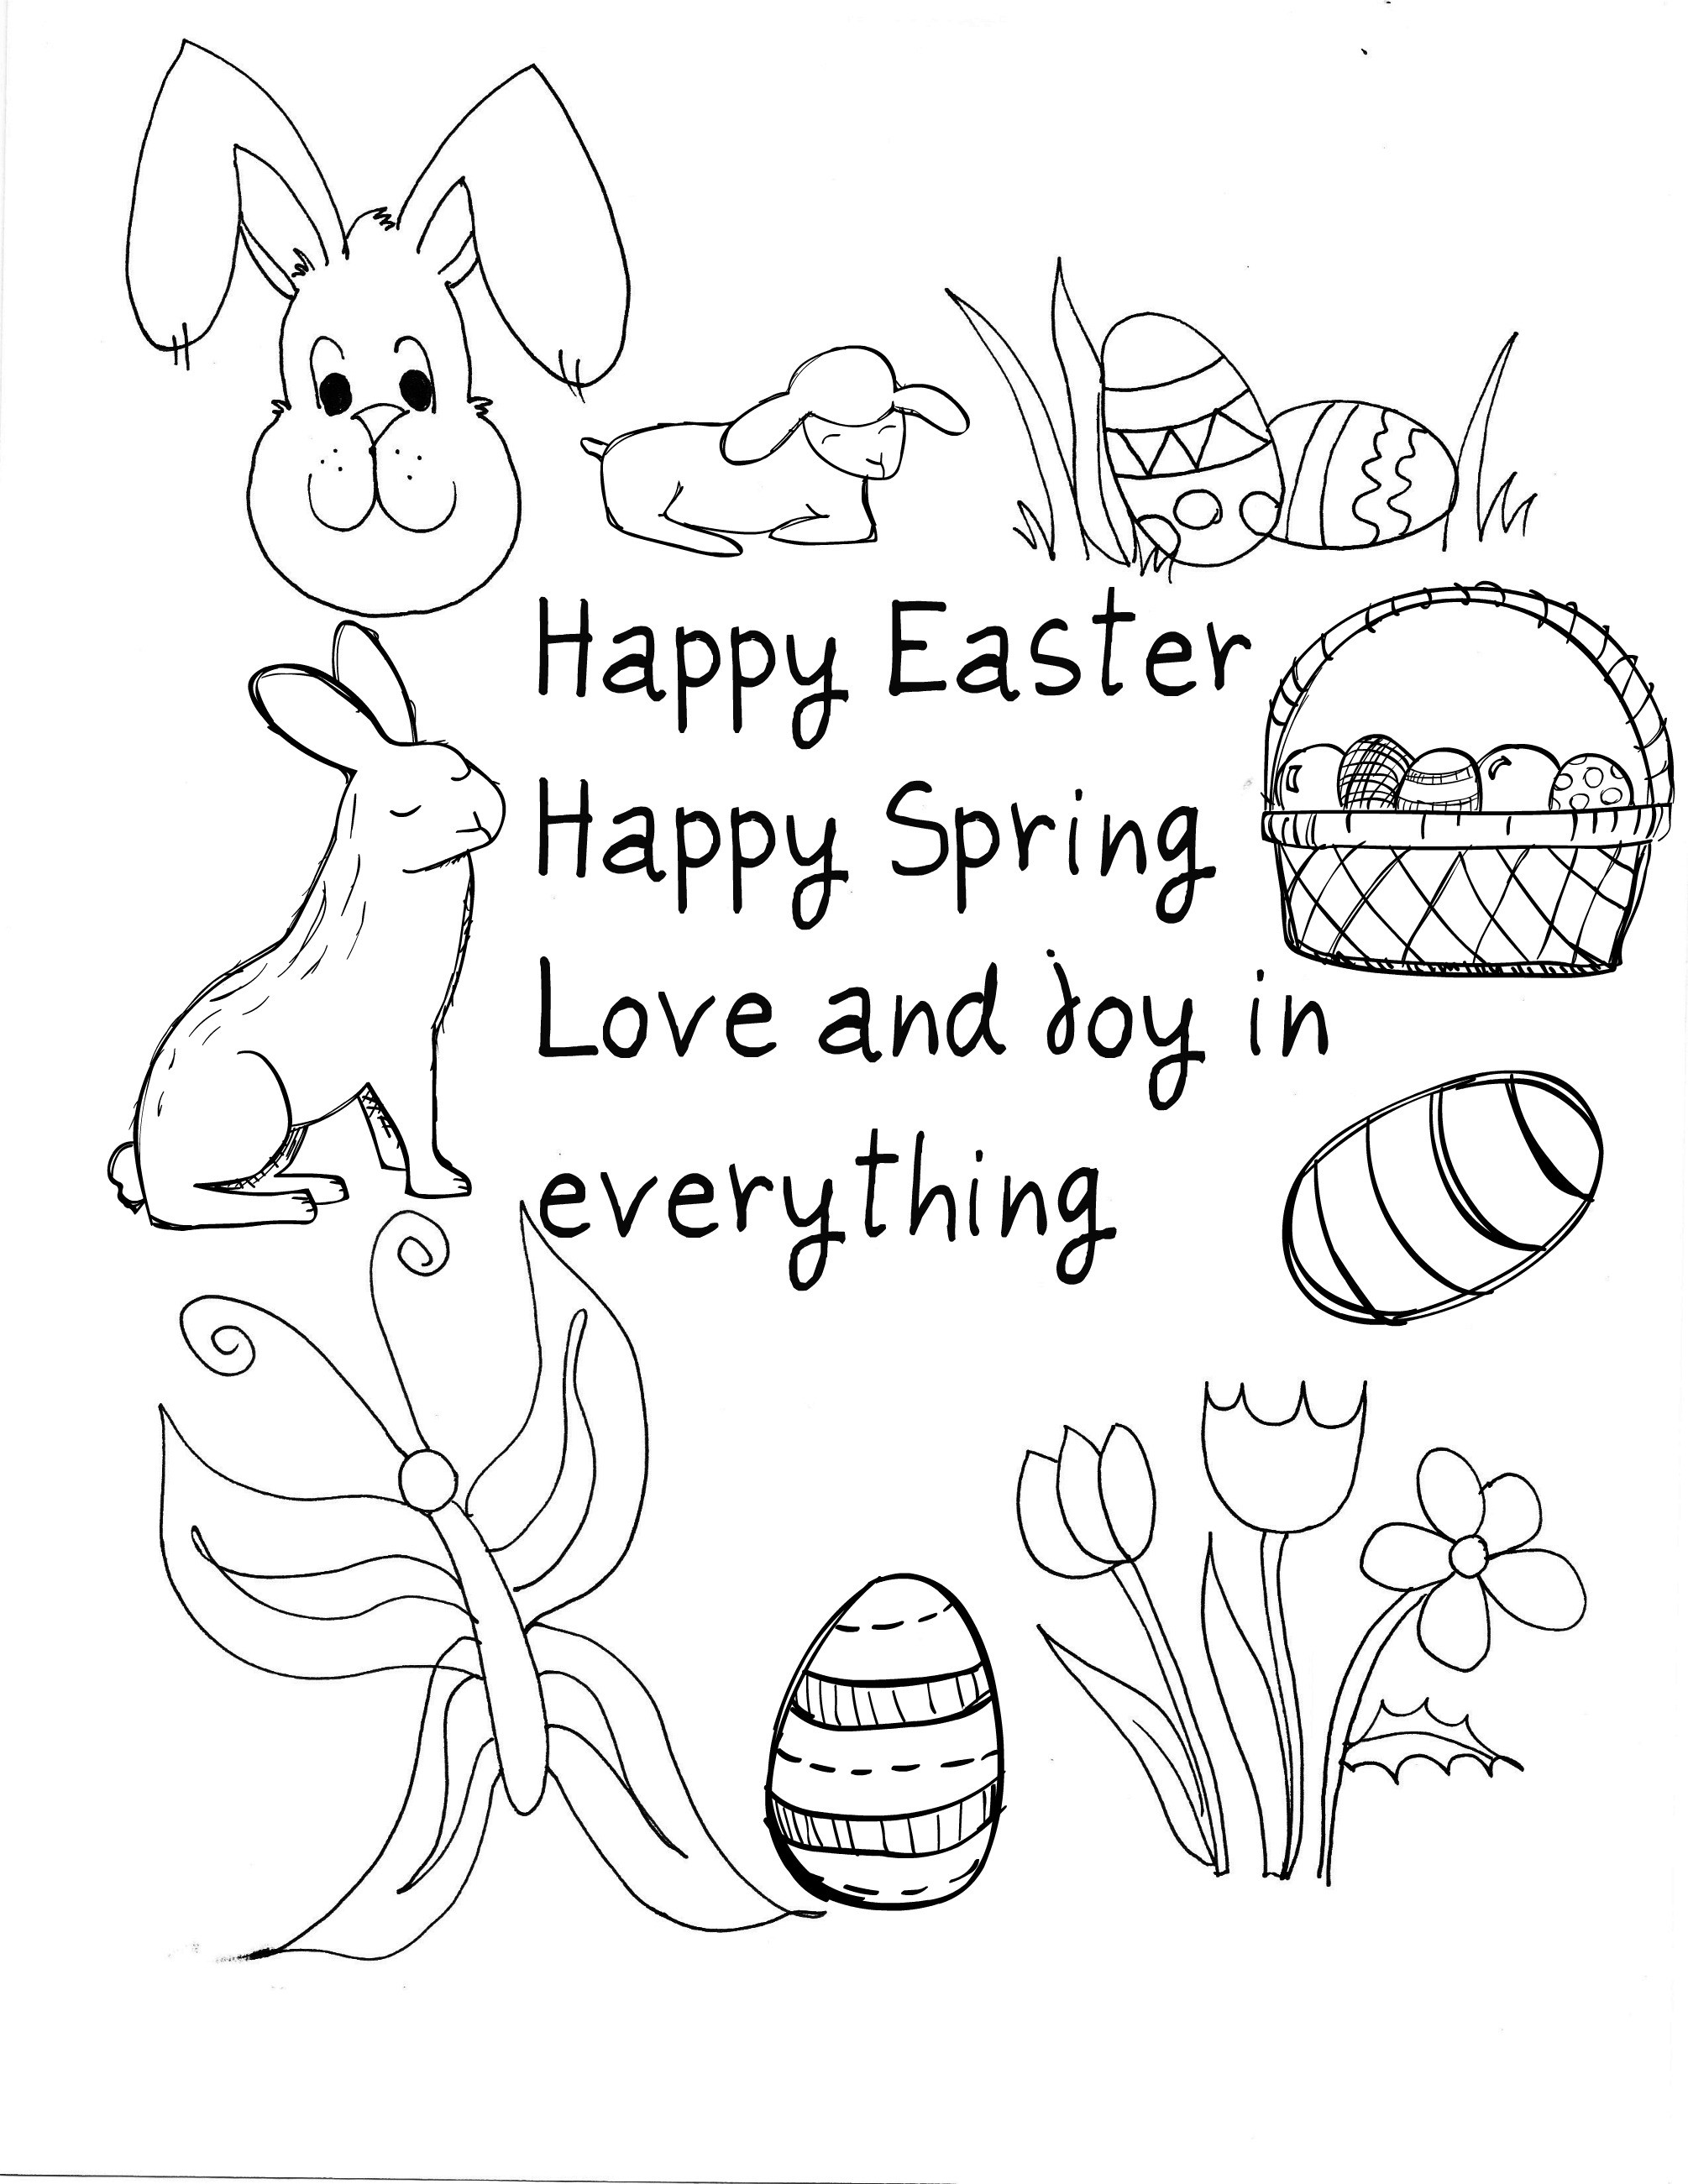 Happy Easter Coloring Pages
 Happy Easter Coloring Pages Best Coloring Pages For Kids